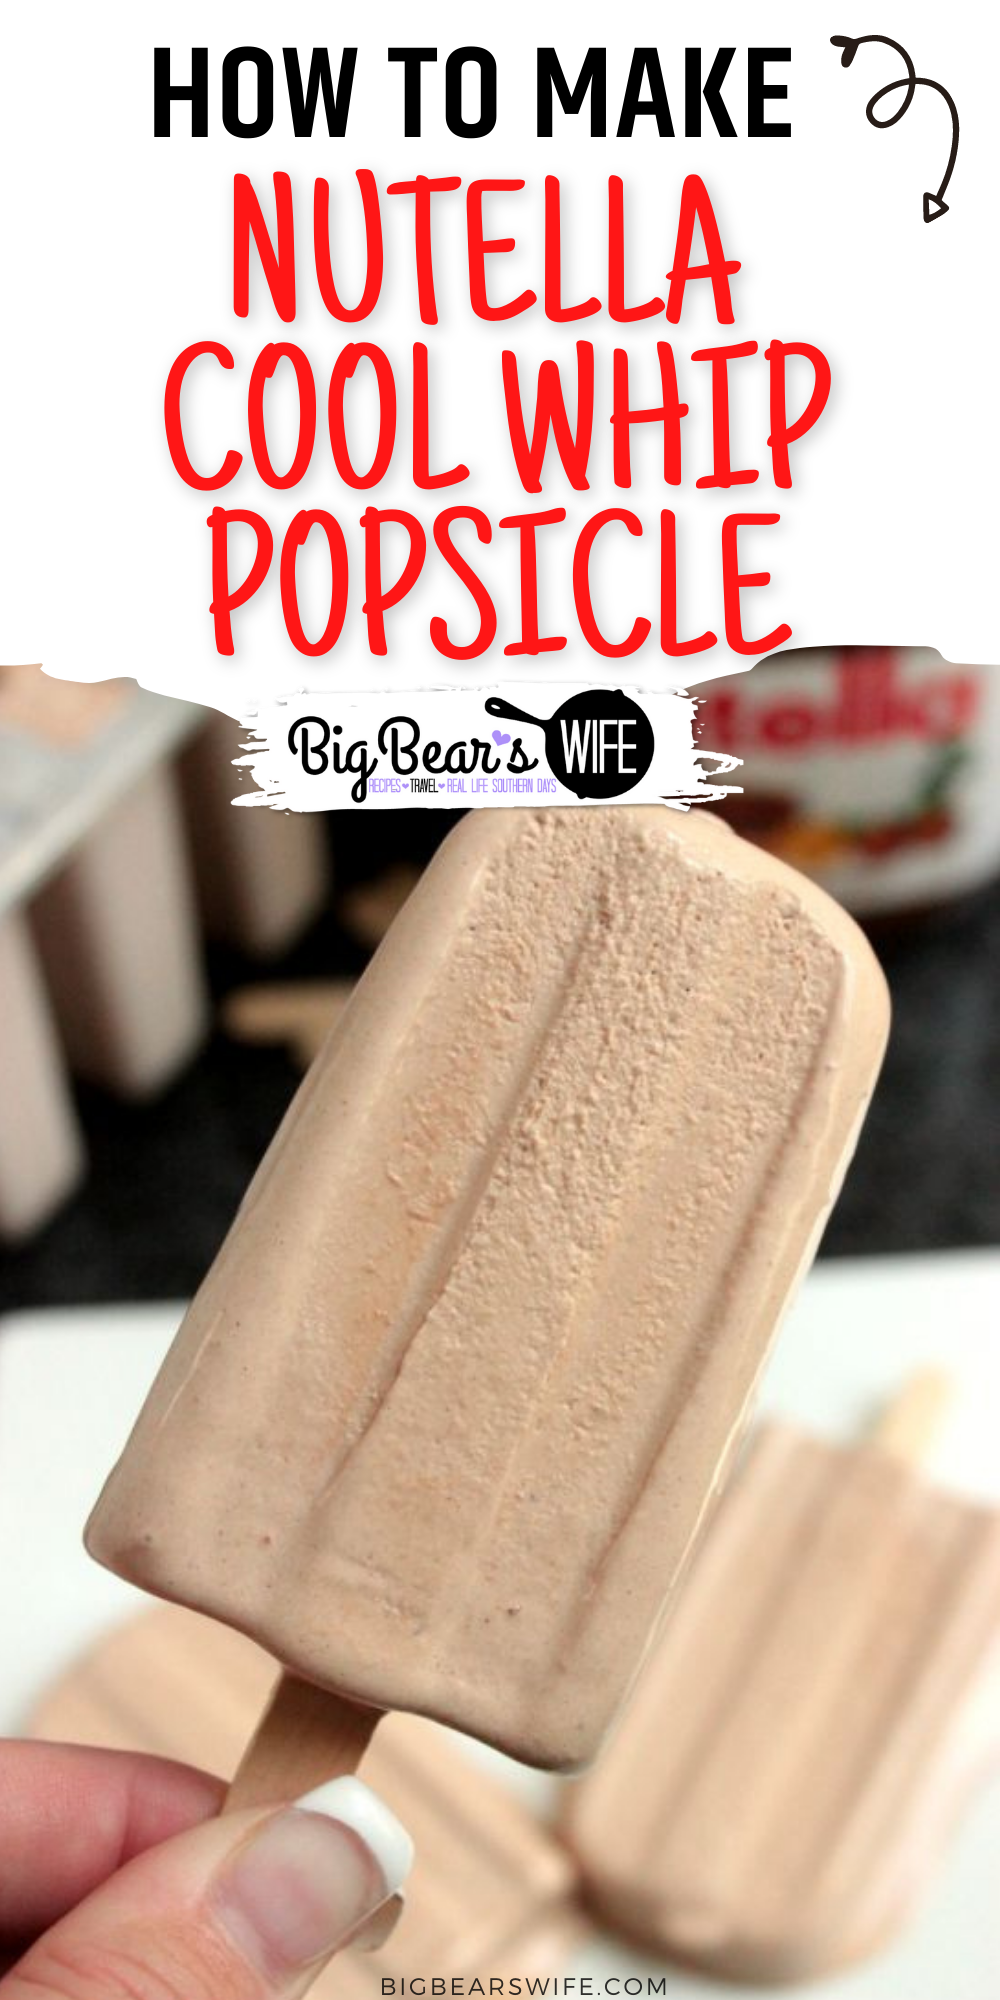   2 ingredient Nutella Cool Whip Popsicles are what you need to cool off during these hot summer days! Whip them together for a great frozen treat! via @bigbearswife